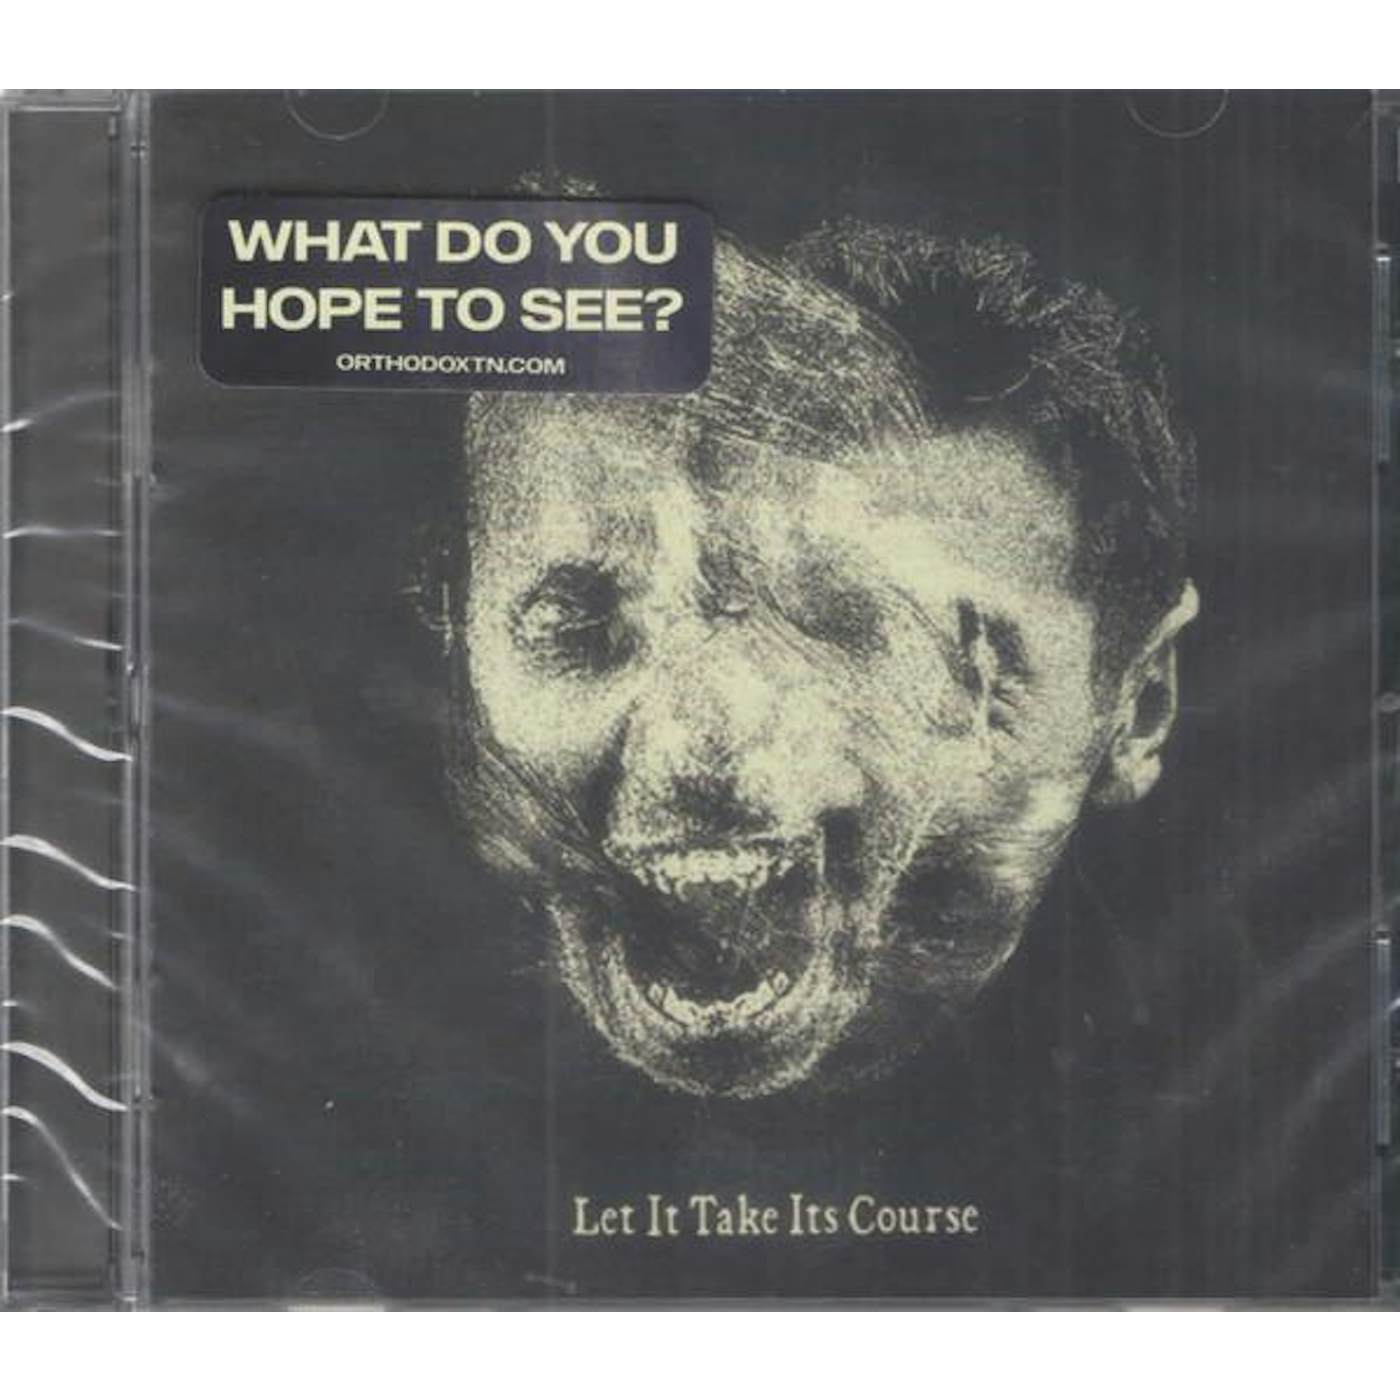 Orthodox LET IT TAKE ITS COURSE CD